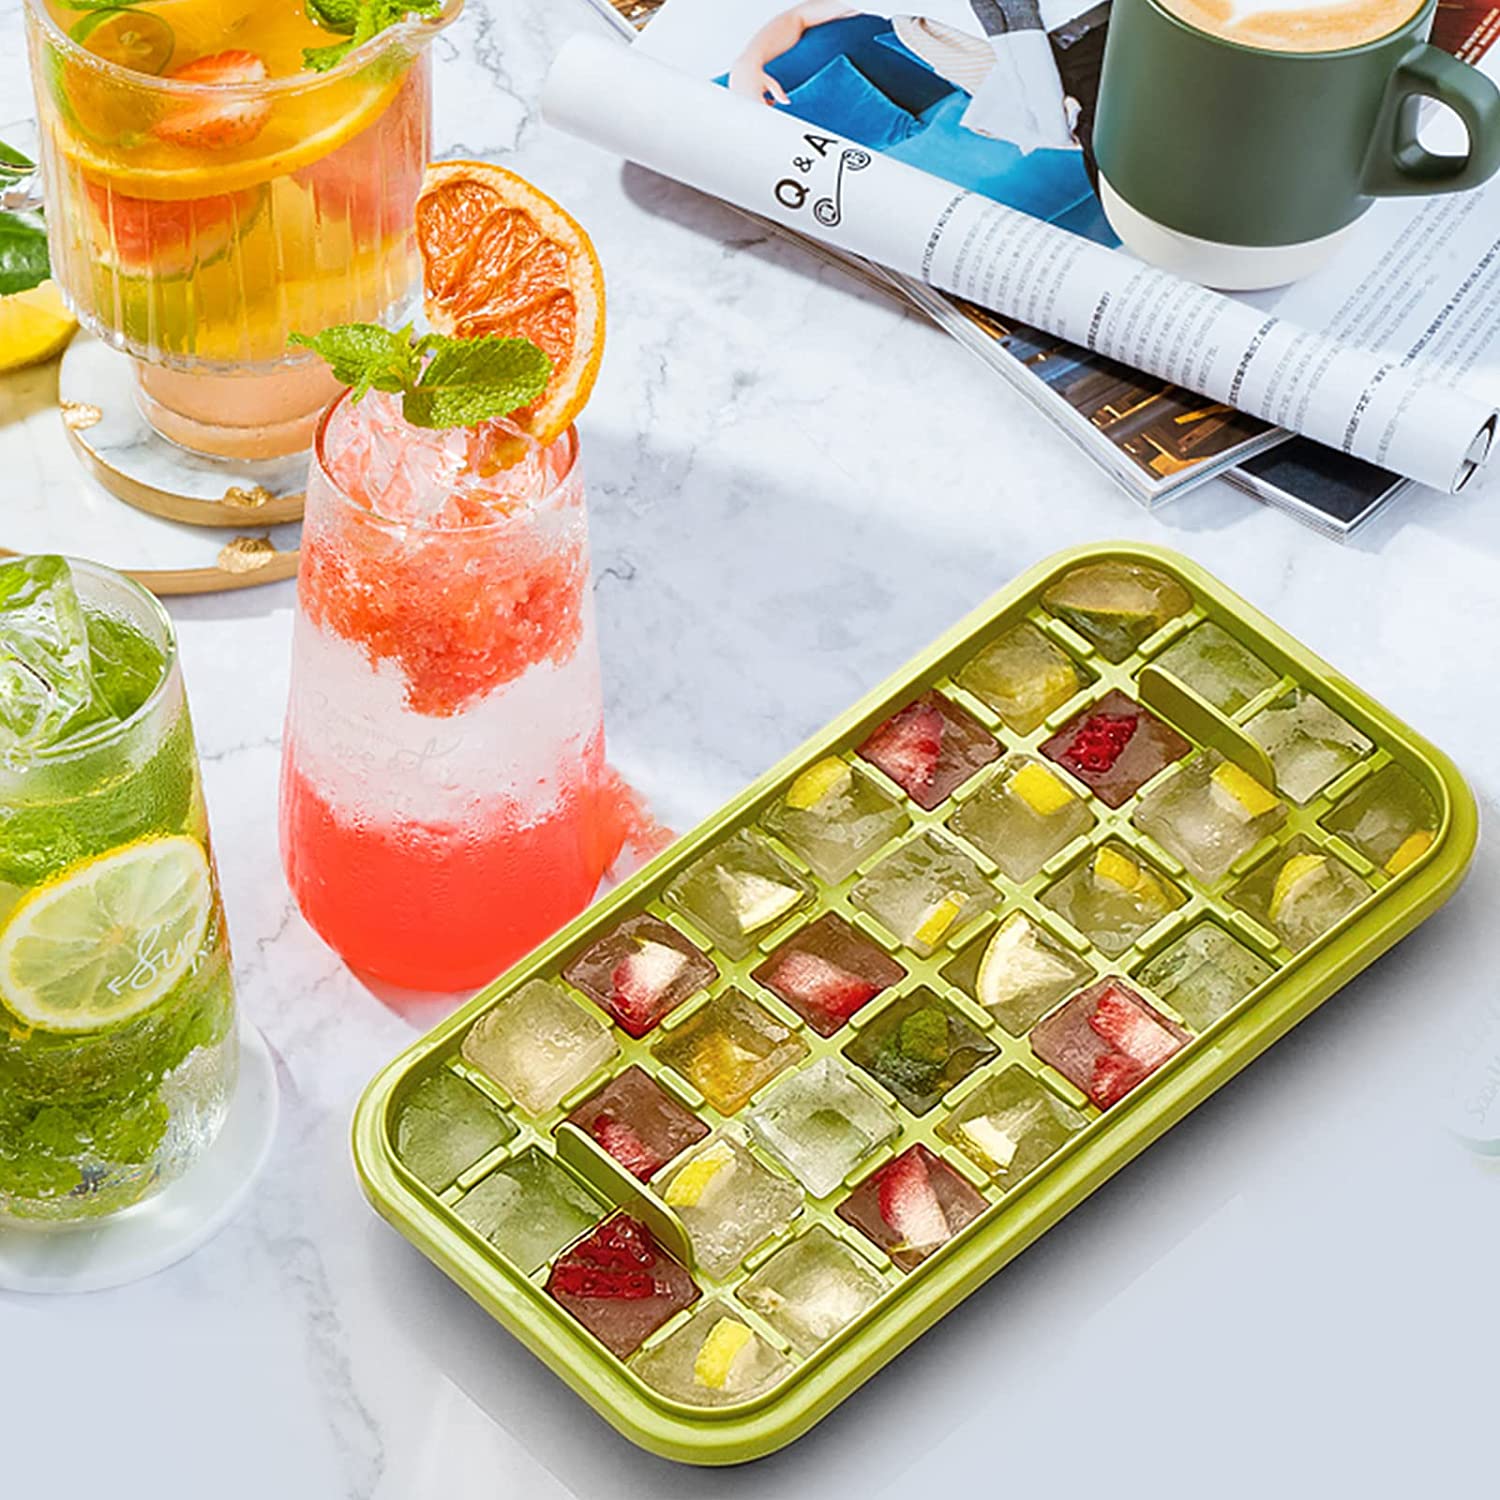 One-button Press Type Ice Mold Box, Kitchen 64 Grid Ice Cube Maker